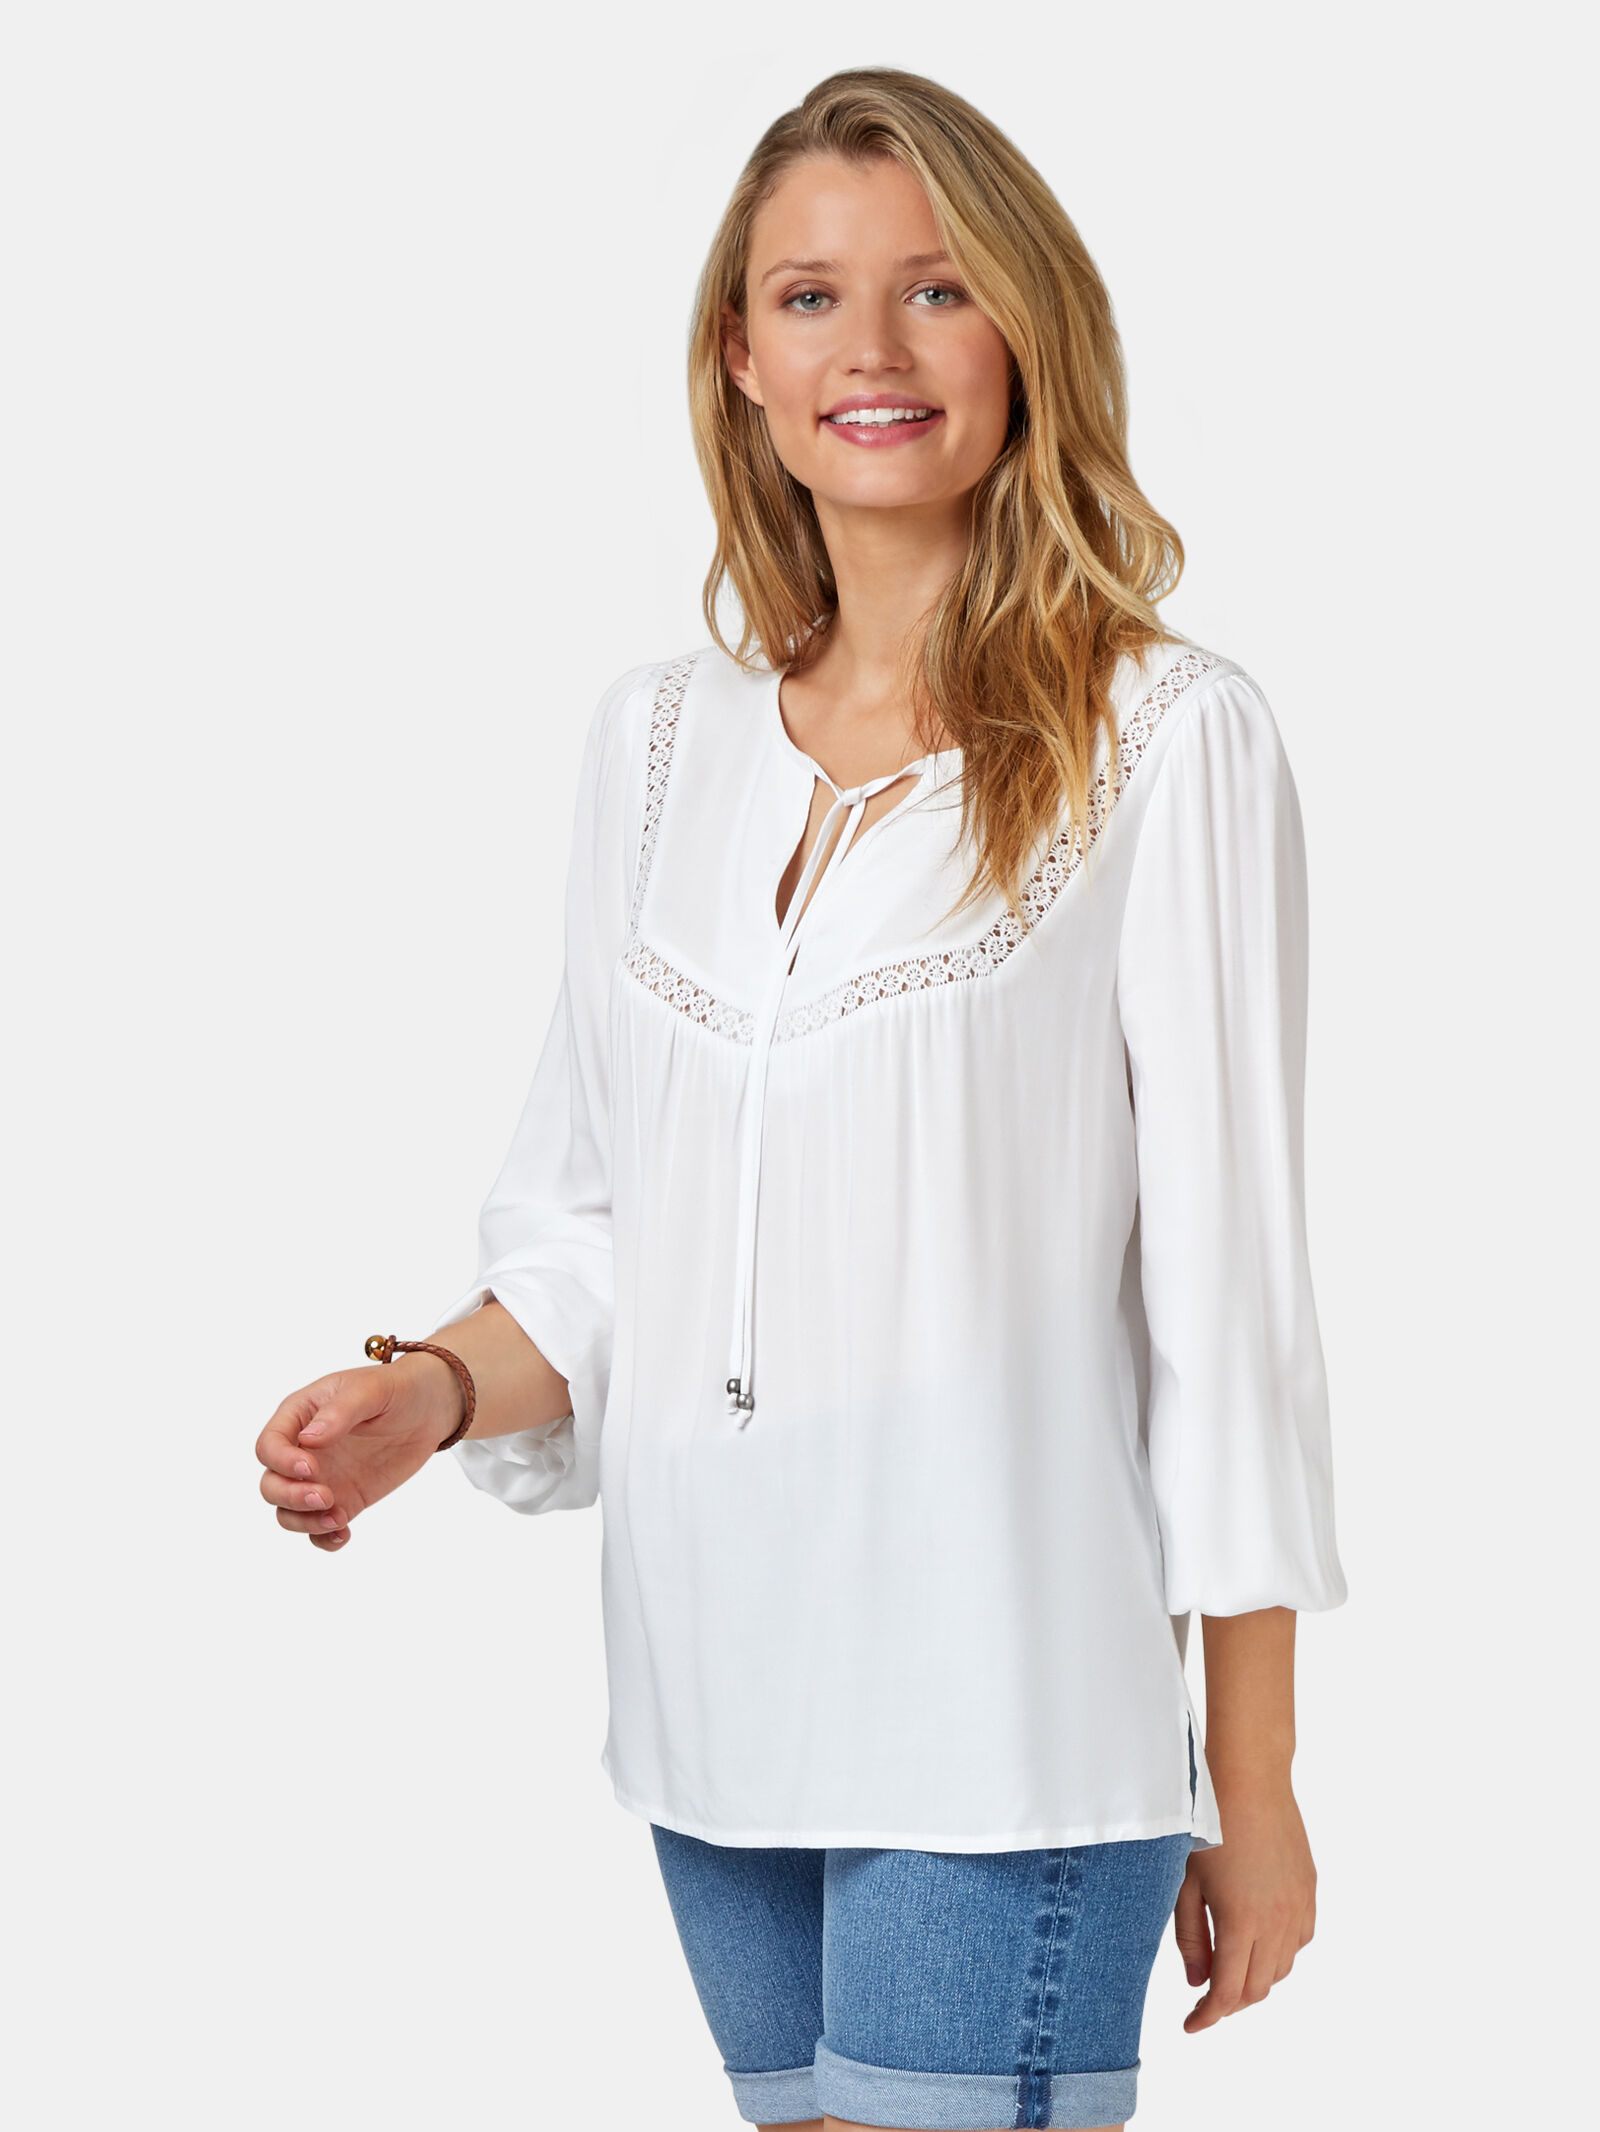 BROOKE SHIELDS Timeless Denim Peasant Top With White Embroidery - QVC.com